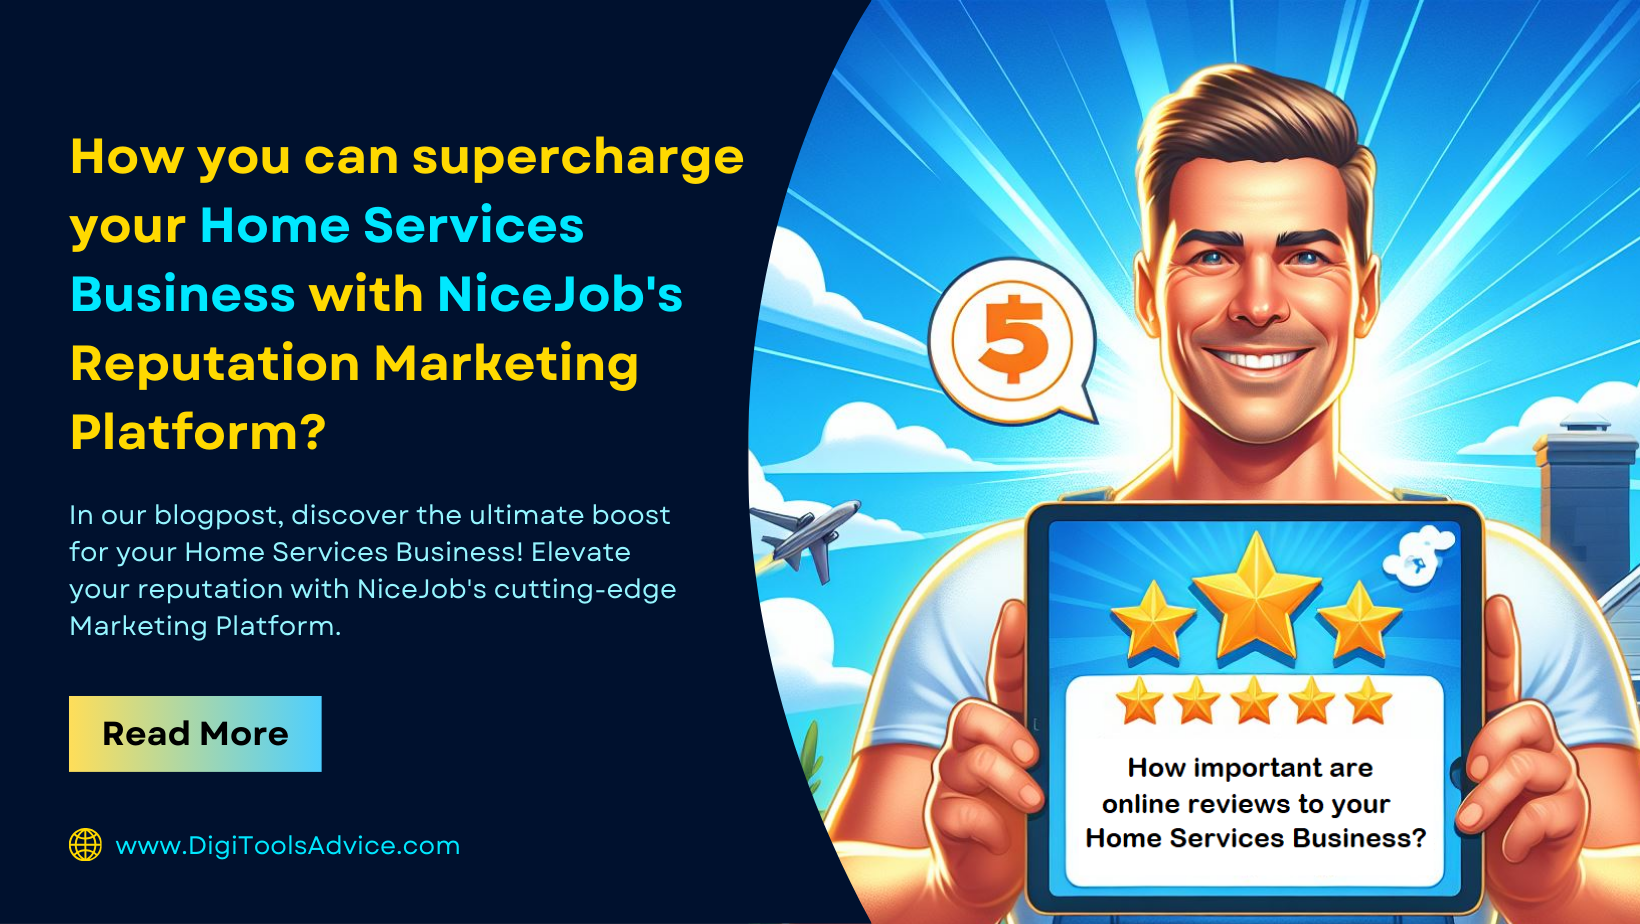 How you can supercharge your Home Services Business with NiceJob's Reputation Marketing Platform?